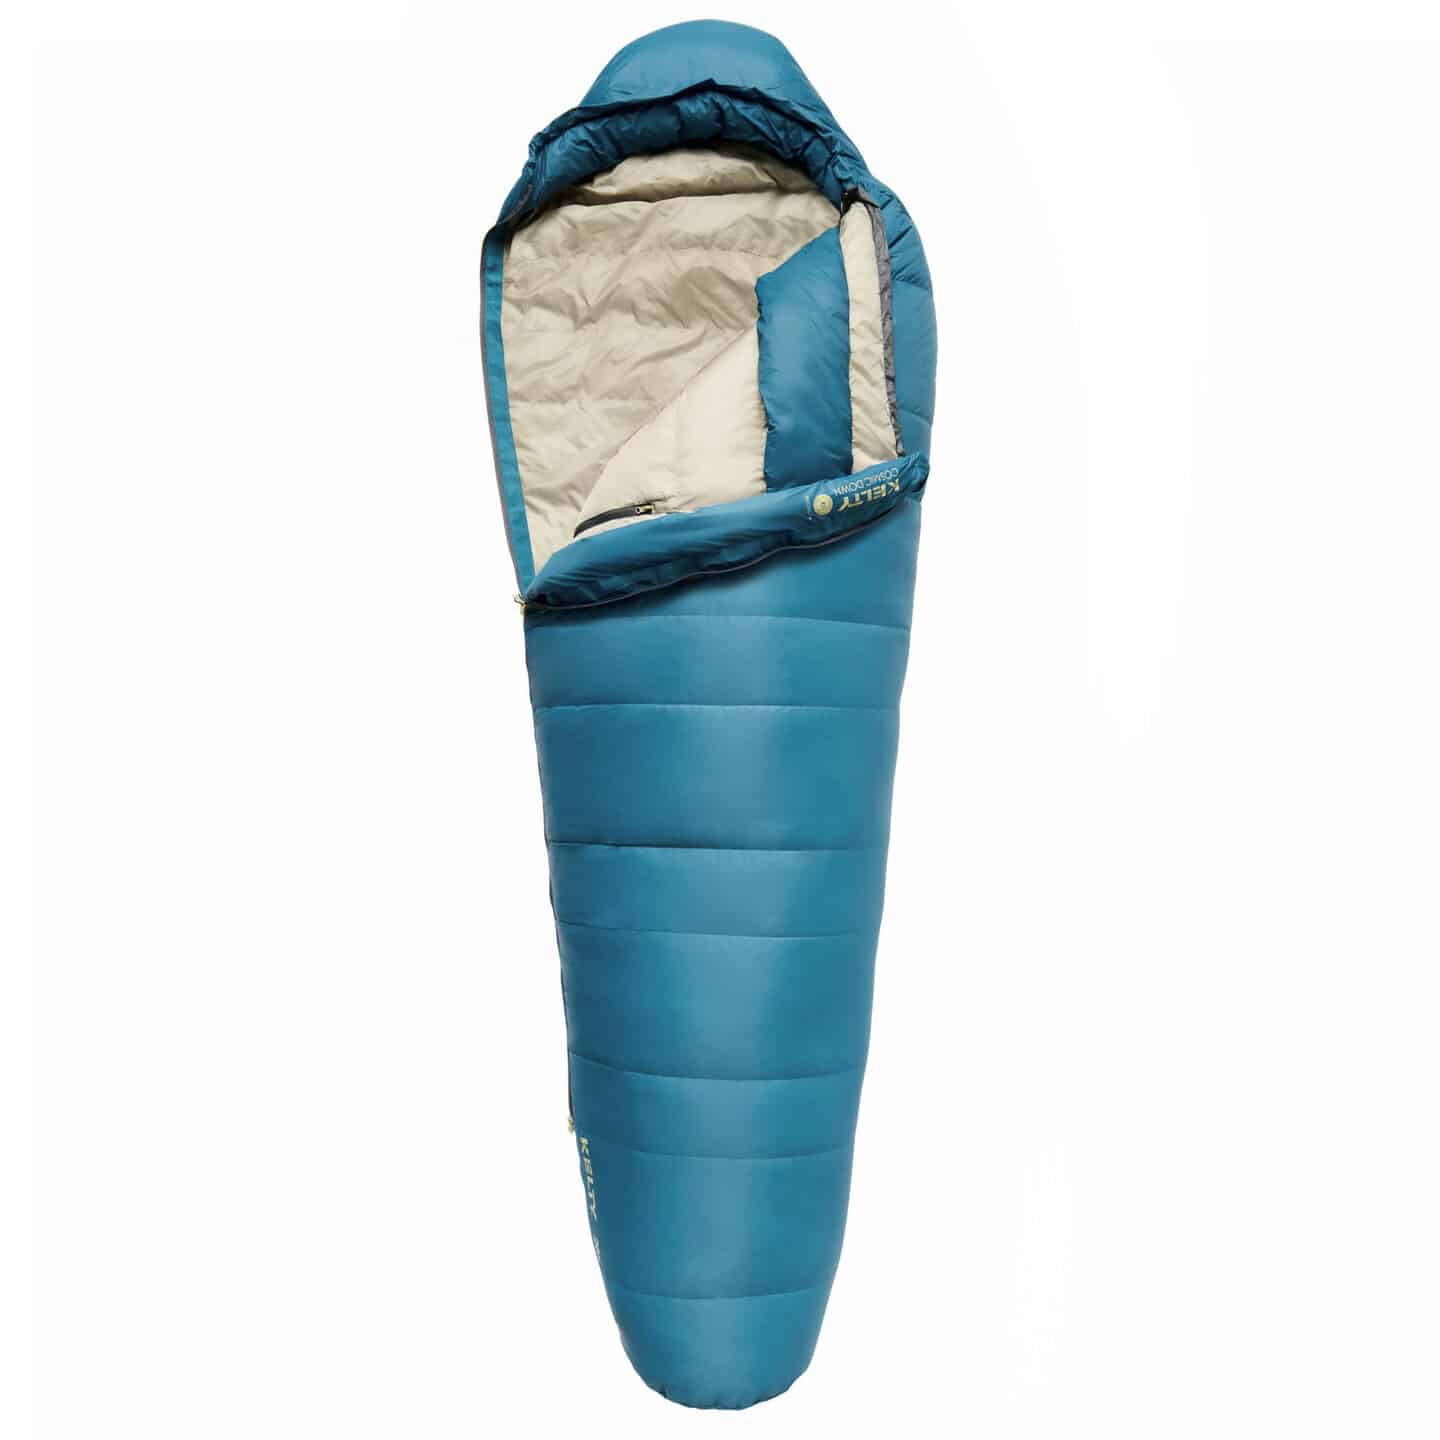 A camping sleeping bag in blue on a white background.